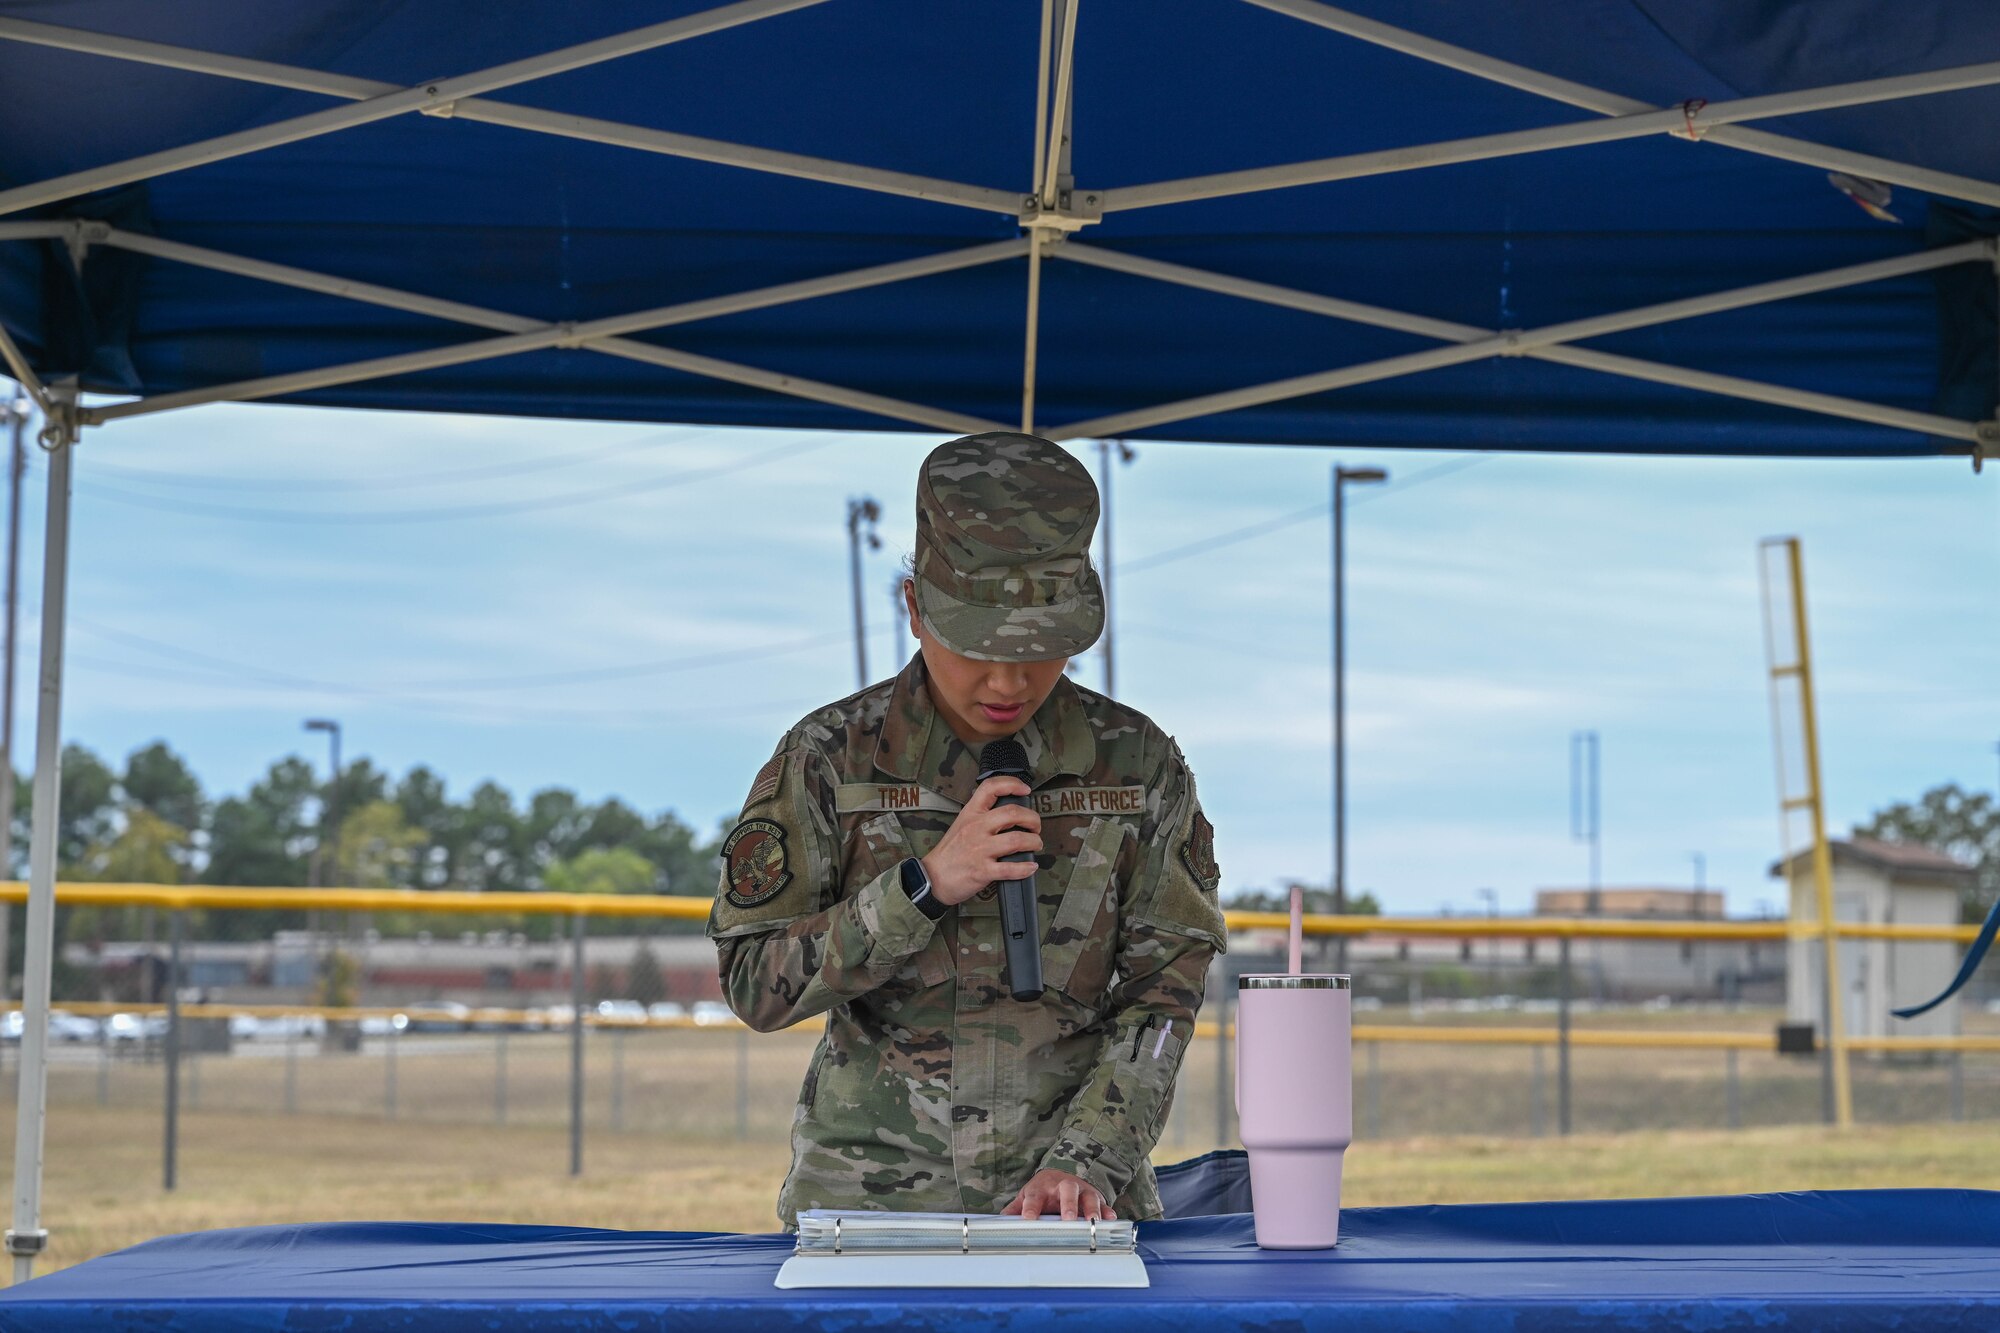 An Airman reads names from a list.